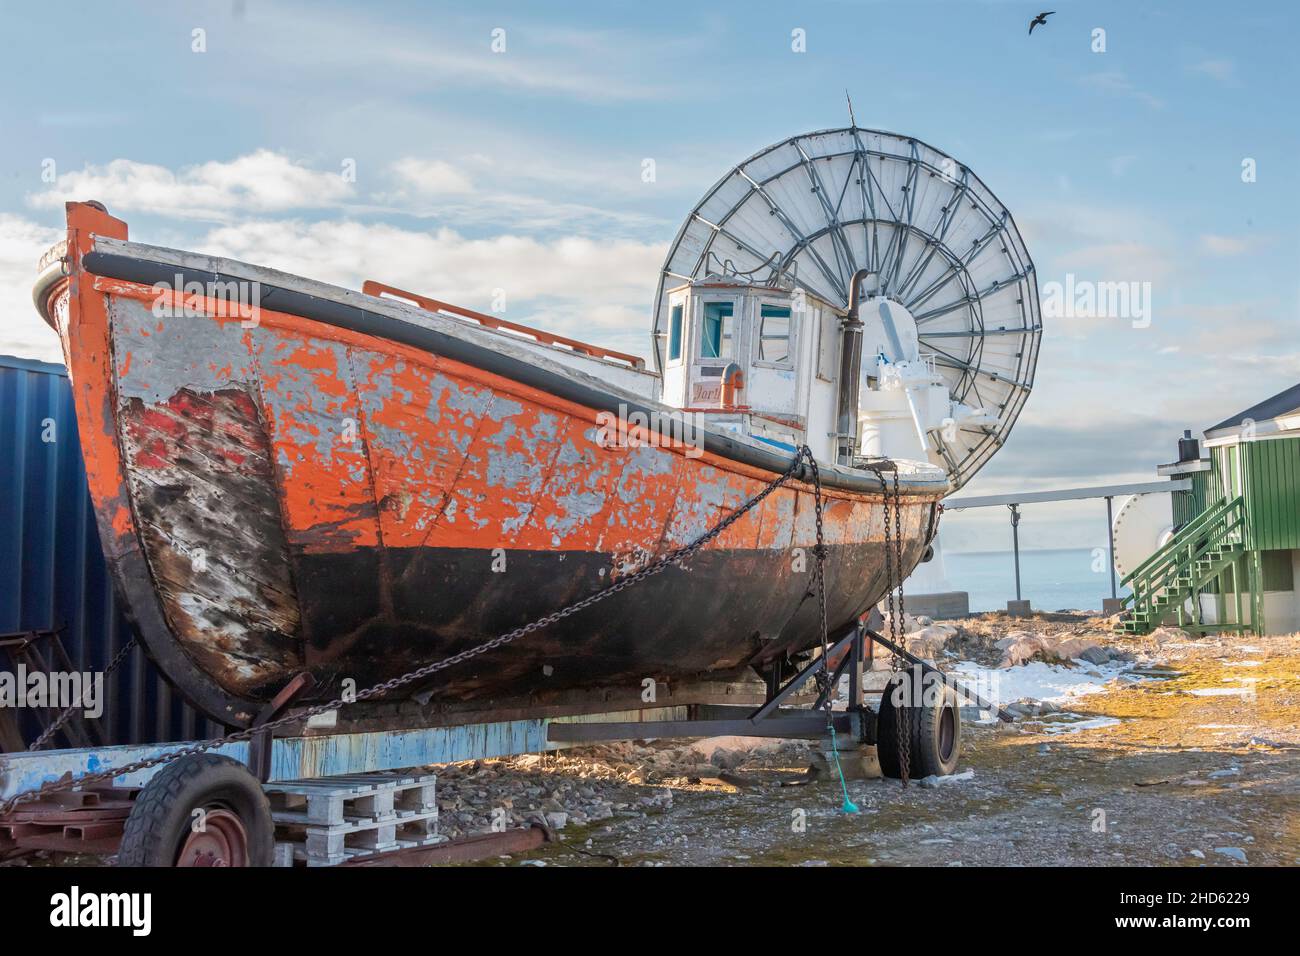 Old boat on trailer by modern satellite dishes, meteorological station, Ittoqqortoormiit, Scoresby Sund, Greenland Stock Photo